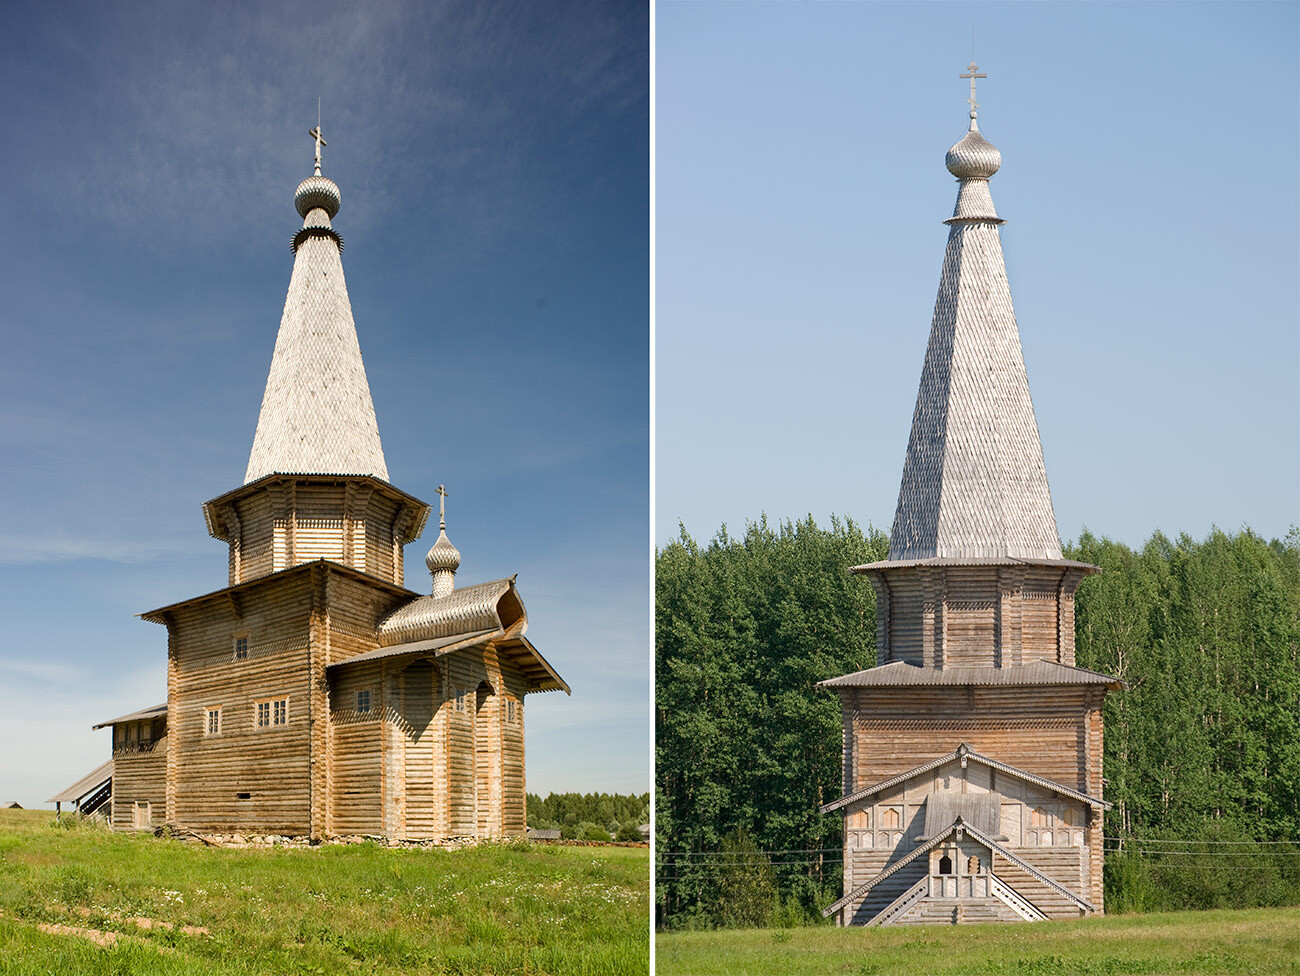 Semyonkovo. Church of St. George, southeast view and west view with elevated entrance porch. Originally built at turn of 18th century in village of Totsky (Tarnoga Disctrict). July 23, 2011